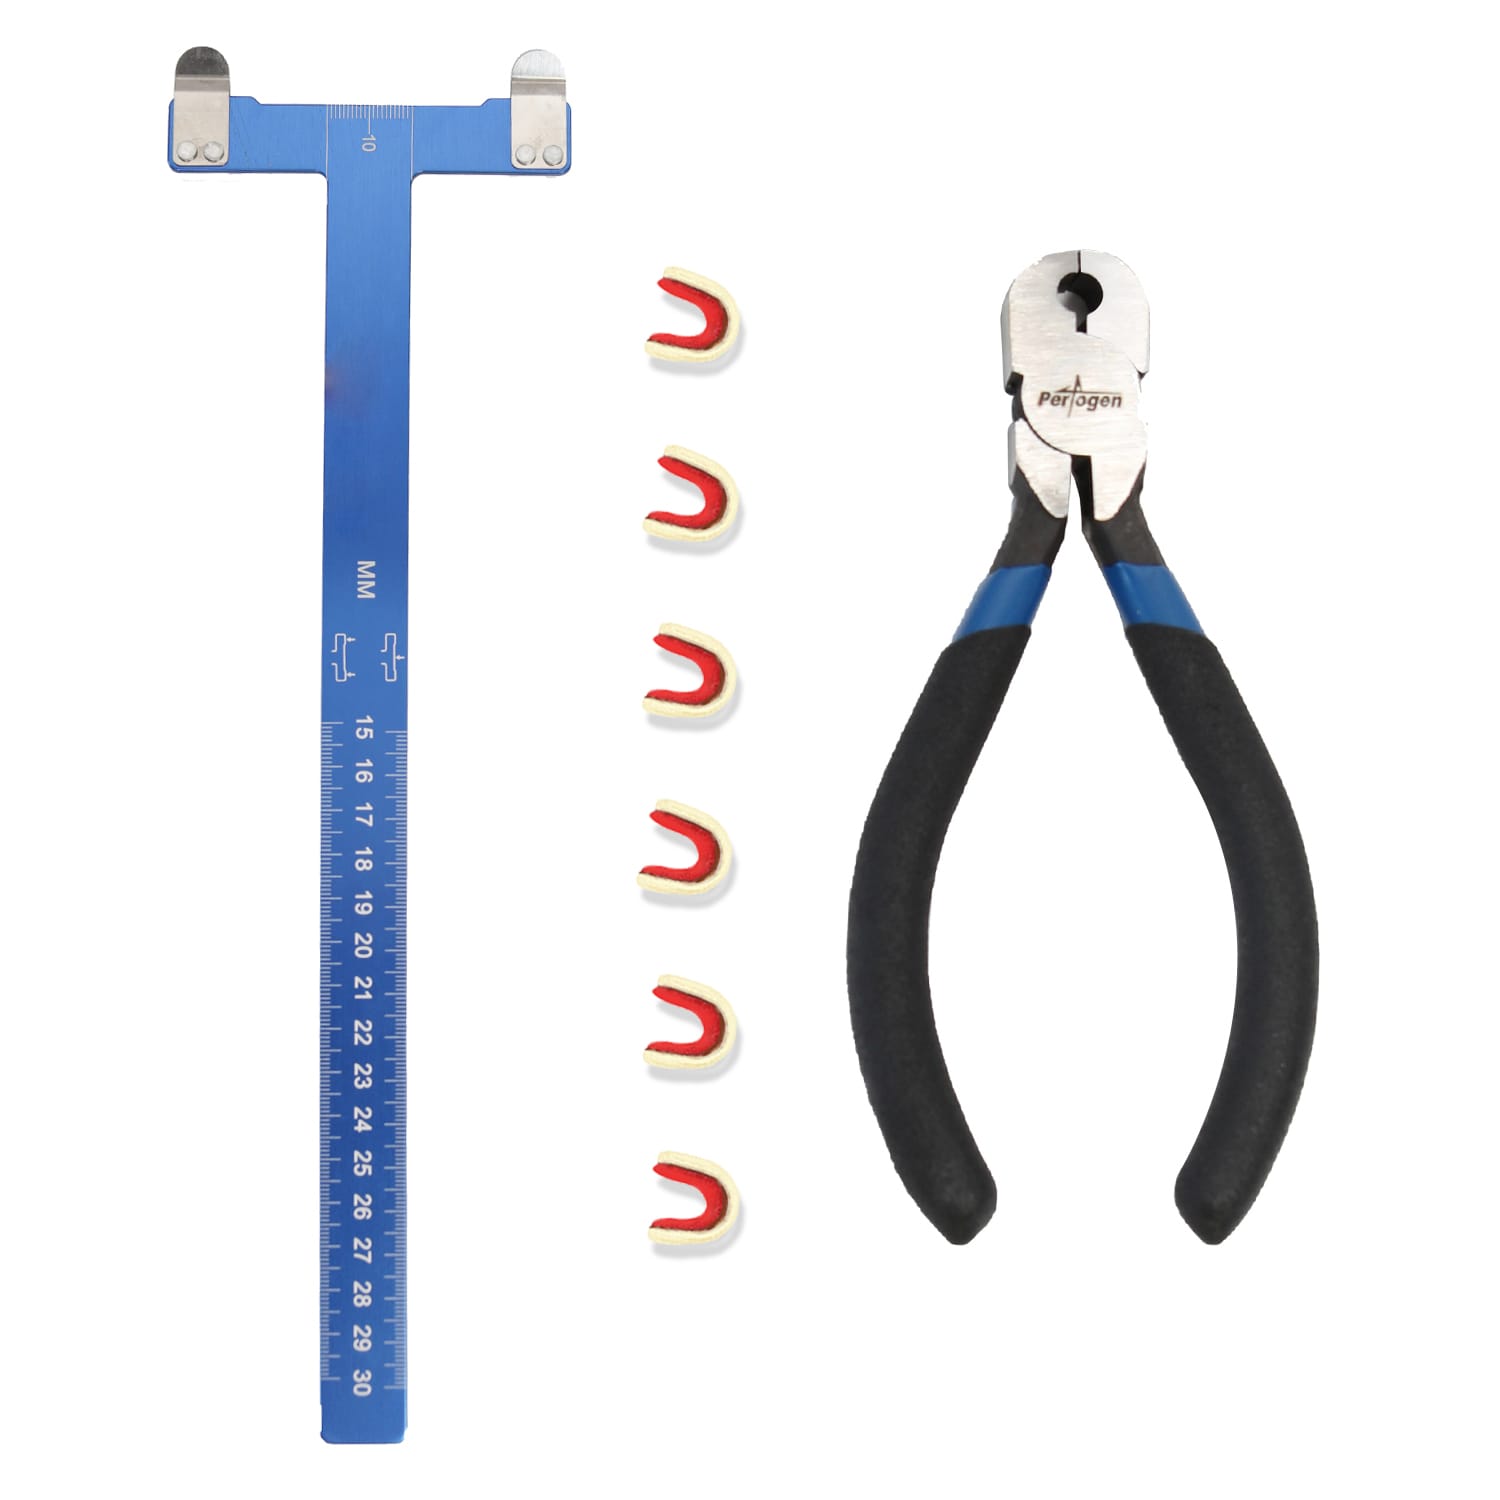 Archery Bow String Nocking points T Square Plier Set for Recurve Bow Featured Image